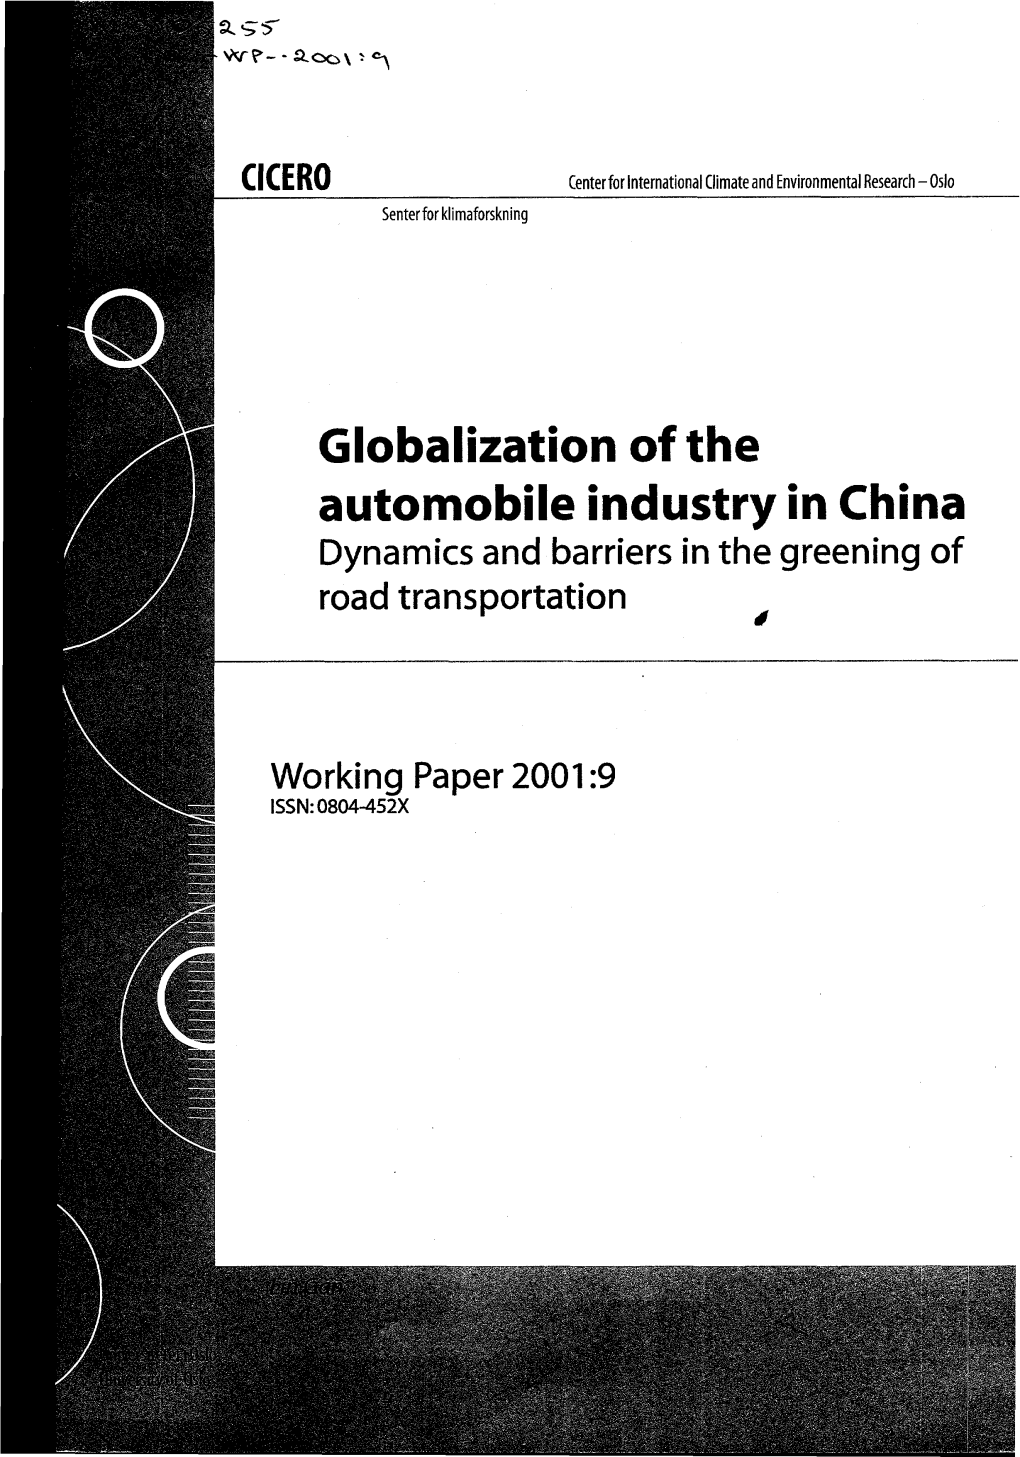 Globalization of the Automobile Industry in China. Dynamics and Barriers in the Greening of Road Transportation 230 Ax 300ACICERO-WP— 320 a ISBN - 403A2001 500A P